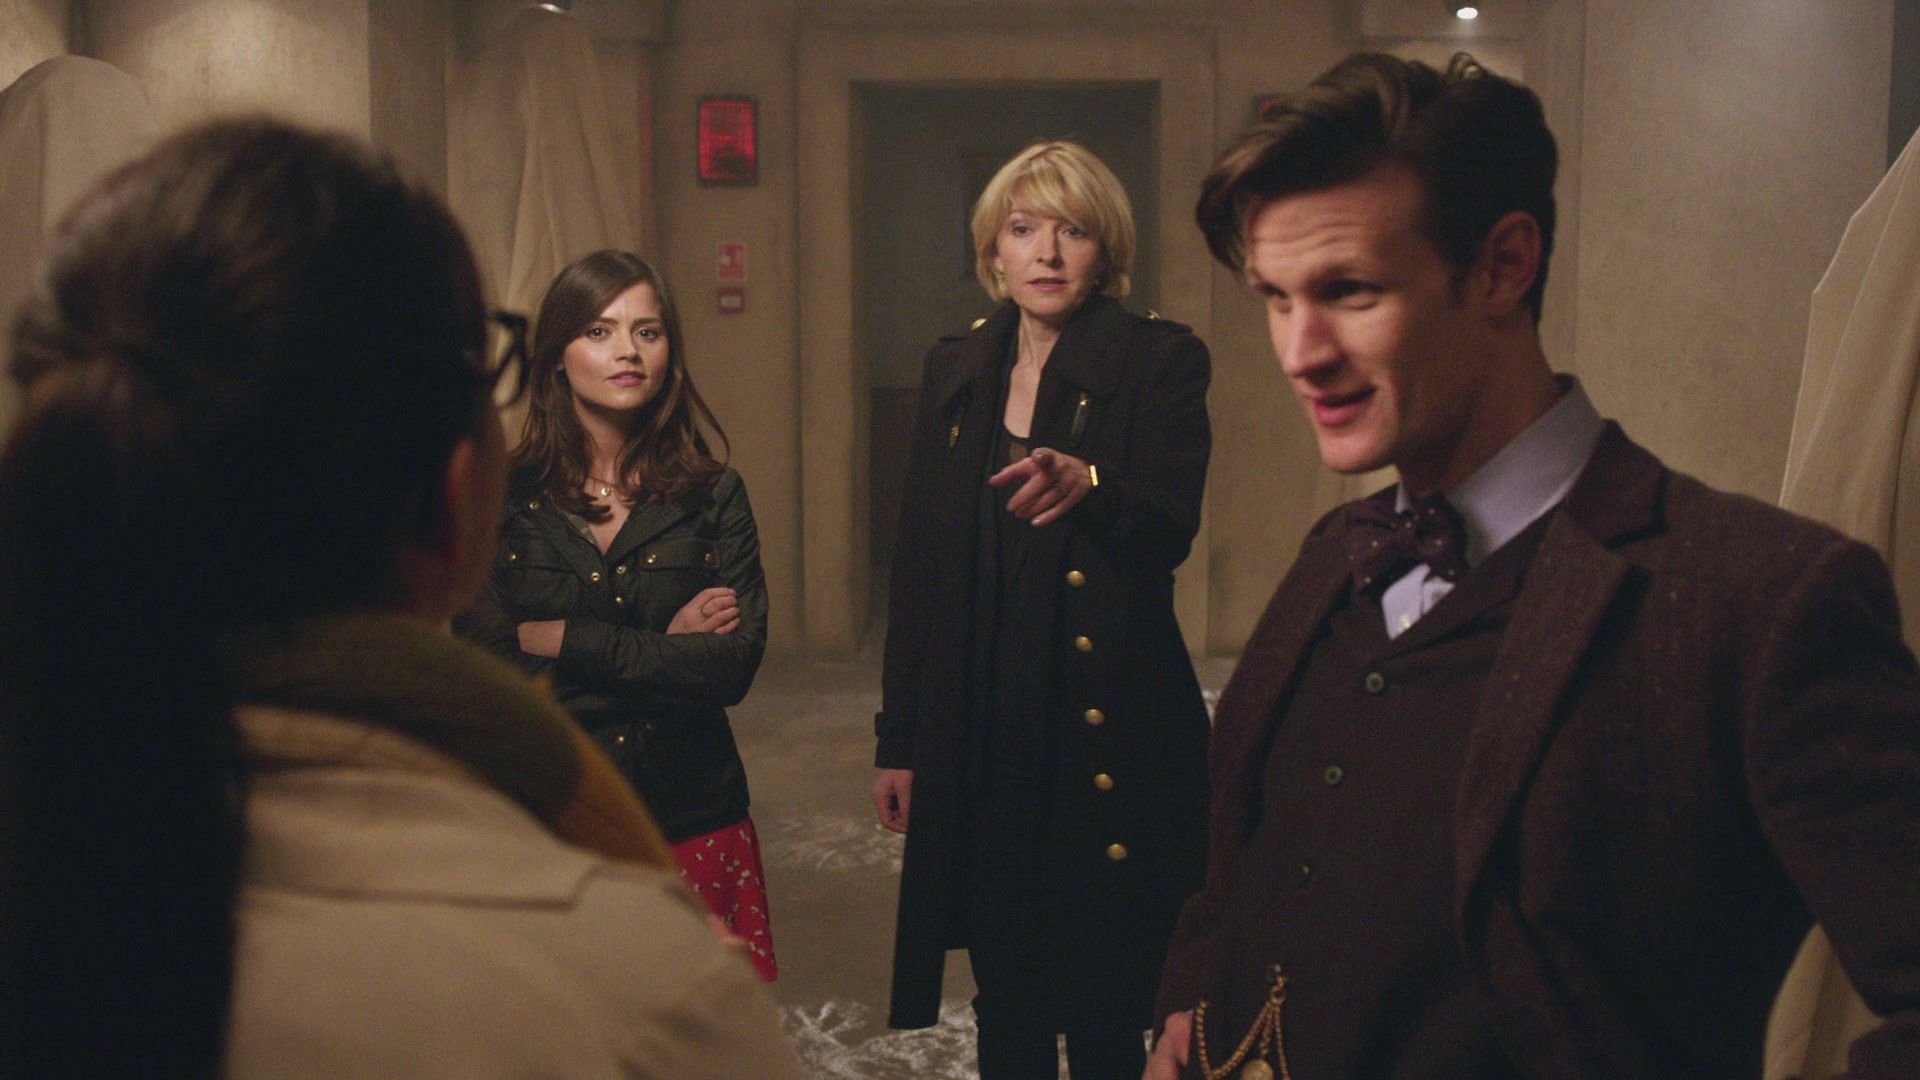 DayOfTheDoctor-Caps-0337.jpg